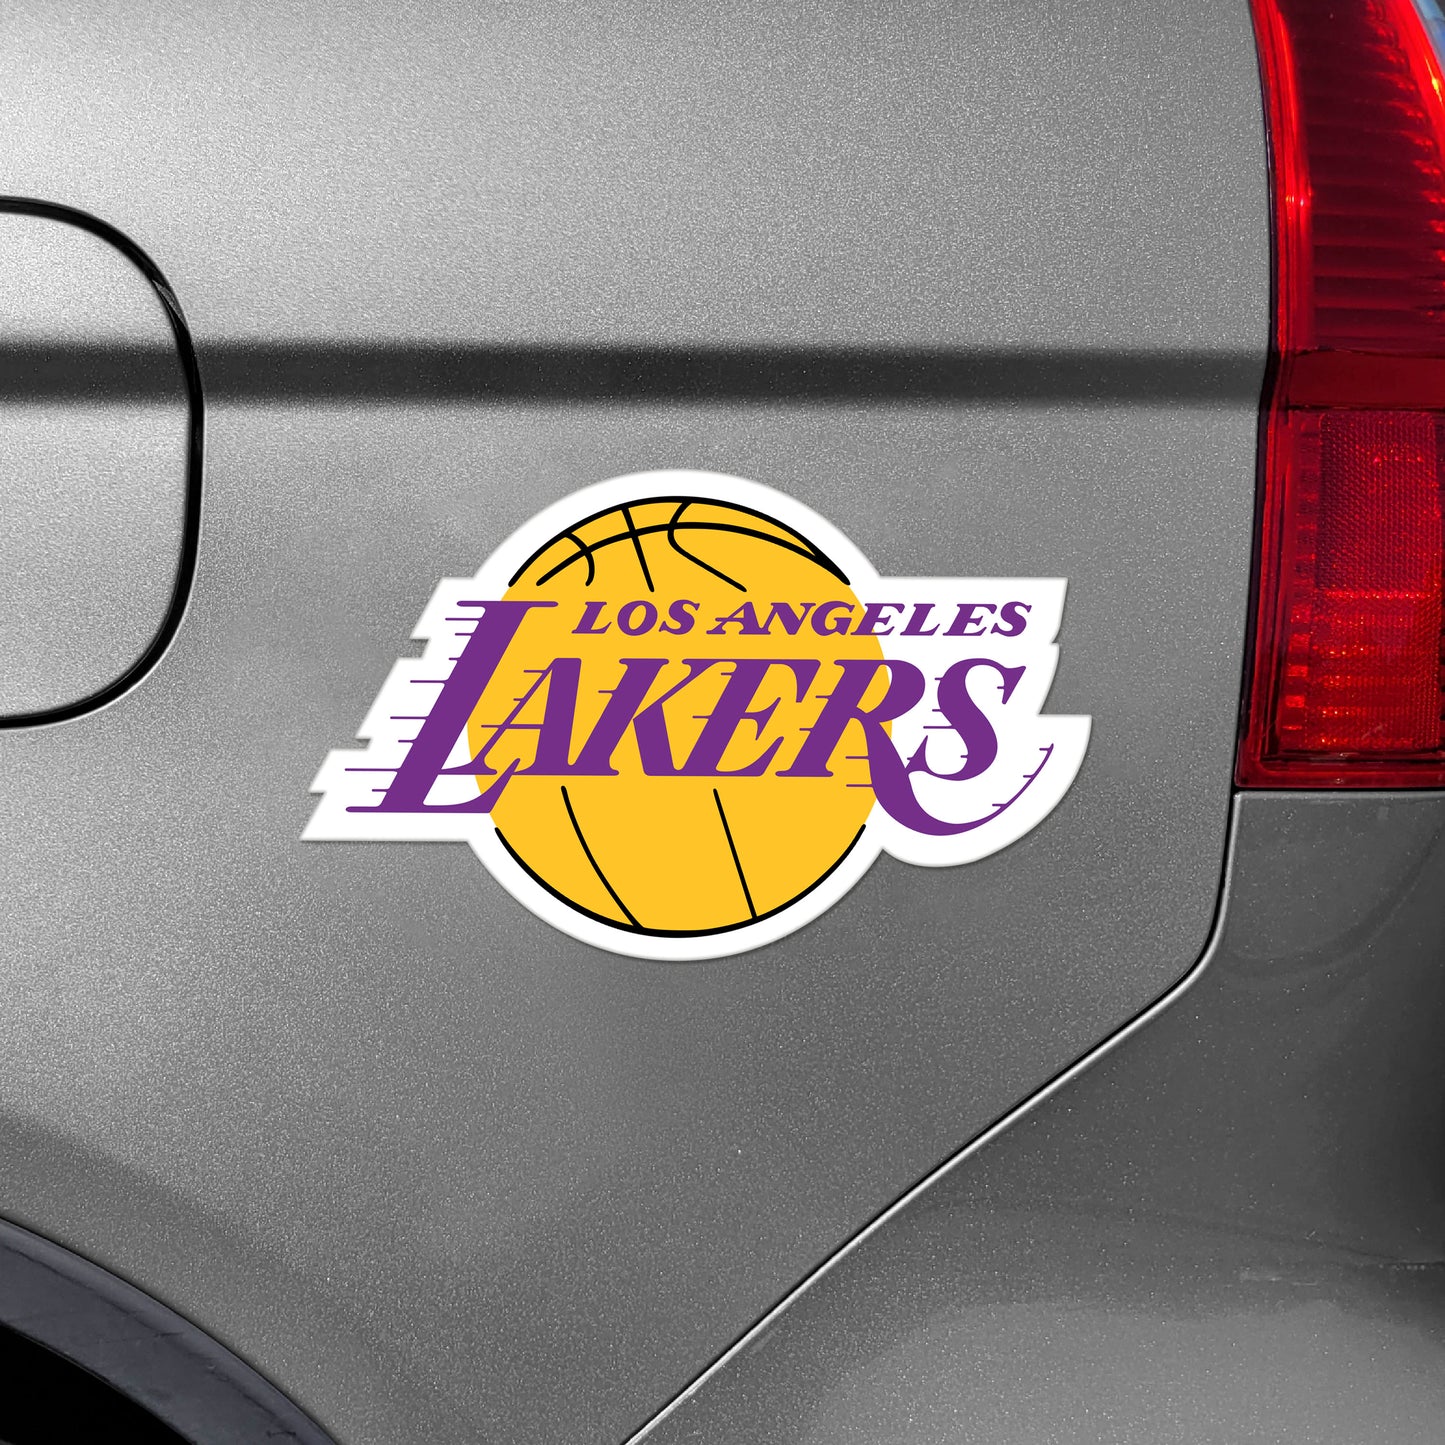 Los Angeles Lakers Large Team Logo Magnet 10" (8.8046"x9.2077")